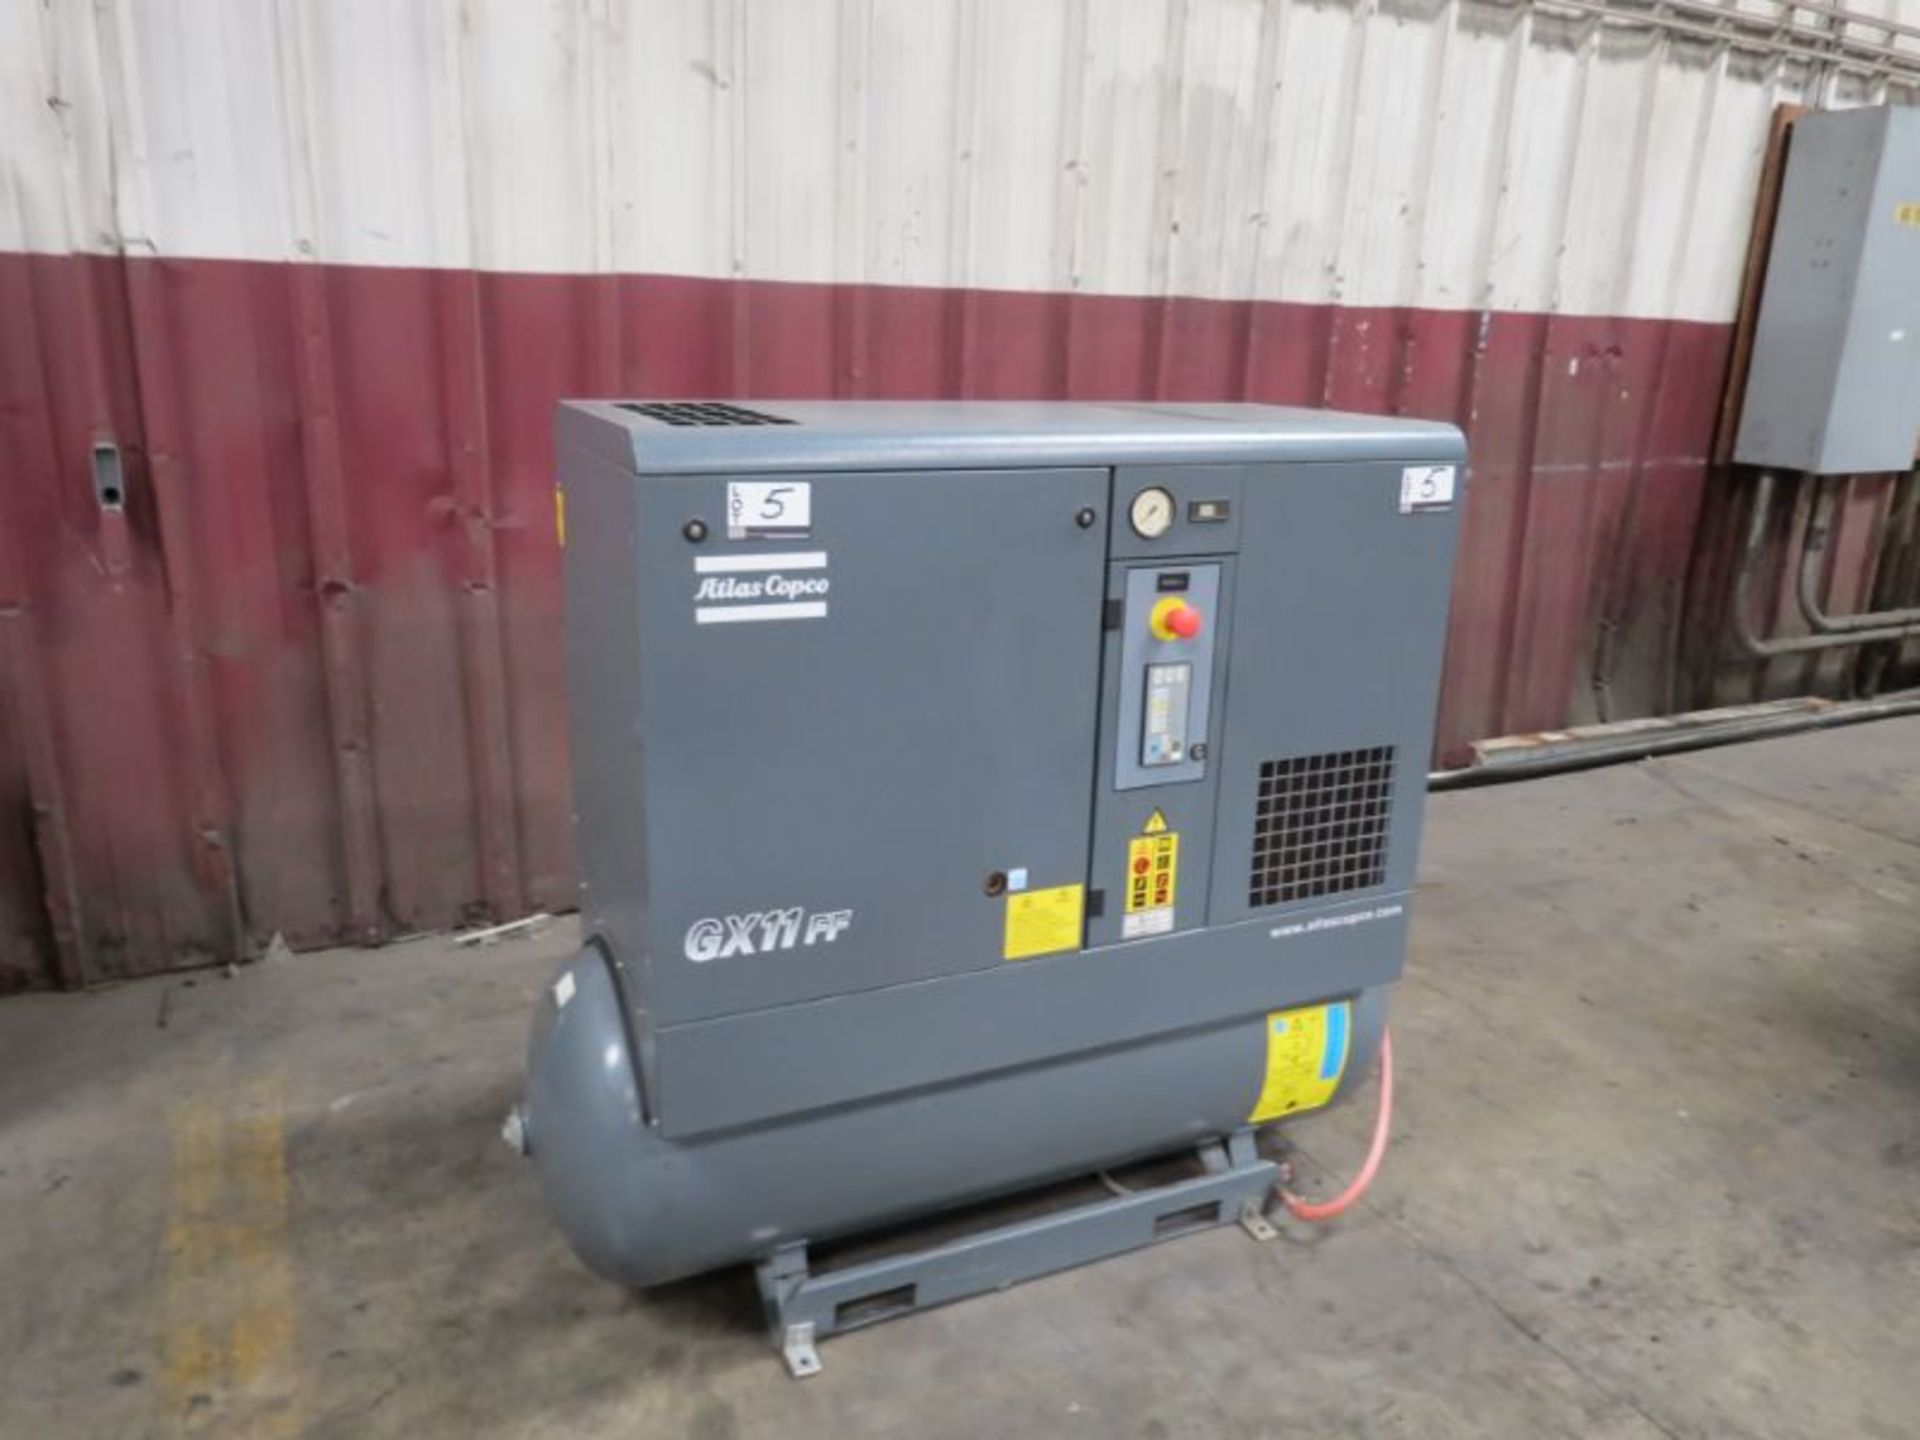 Atlas Copco GX11FF Rotary Screw Air Compressor w/ Integrated Air Dryer, 15HP, sn: CAI854486, New - Image 2 of 5